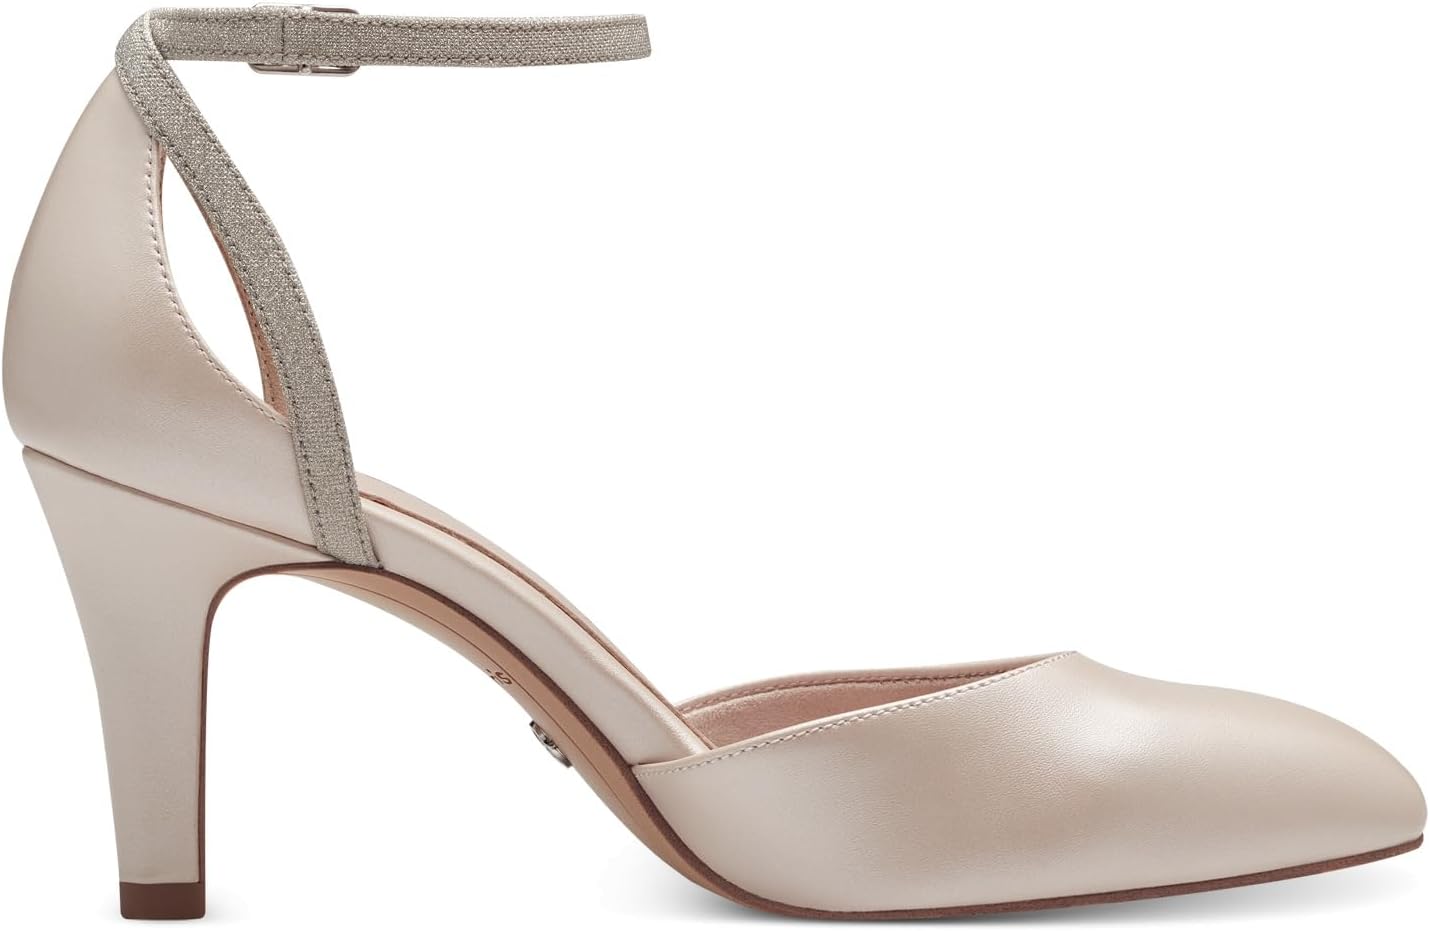 Tamaris Shimmer Rose Pearl Court Shoe with Sparkle Strap